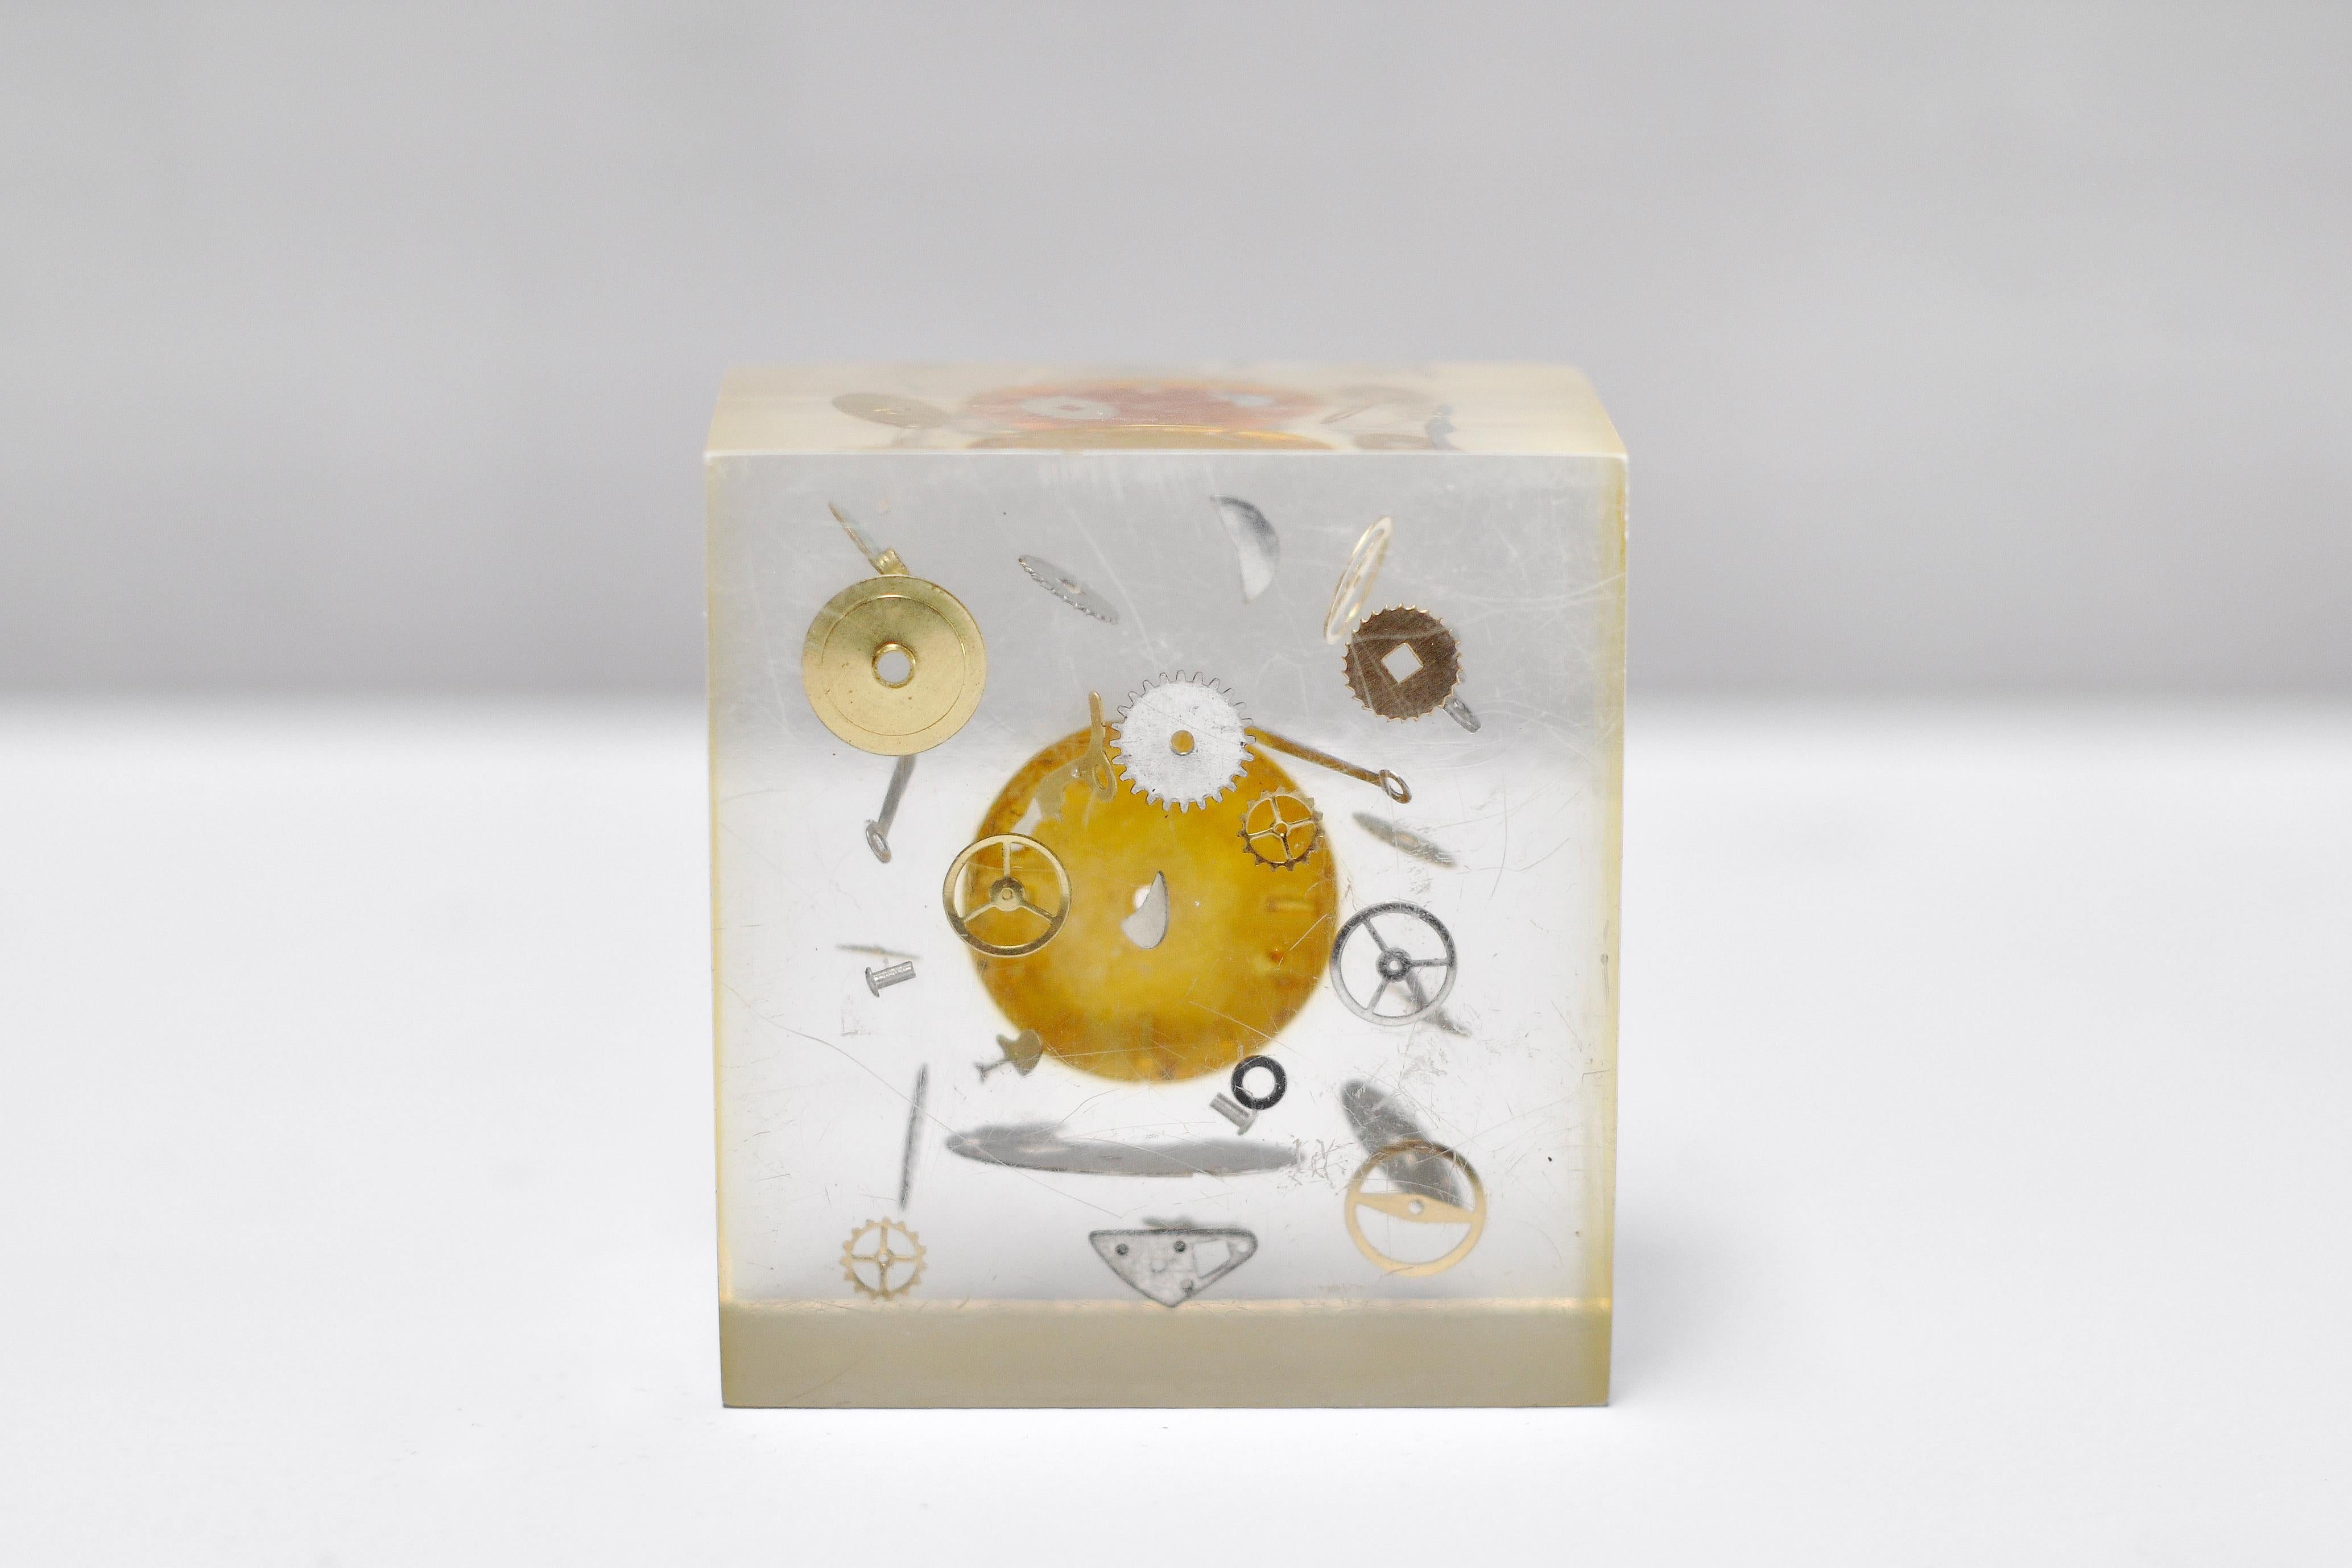 French Modernist Lucite Resin Sculpture with Exploded Clock by Pierre Giraudon, 1970's For Sale